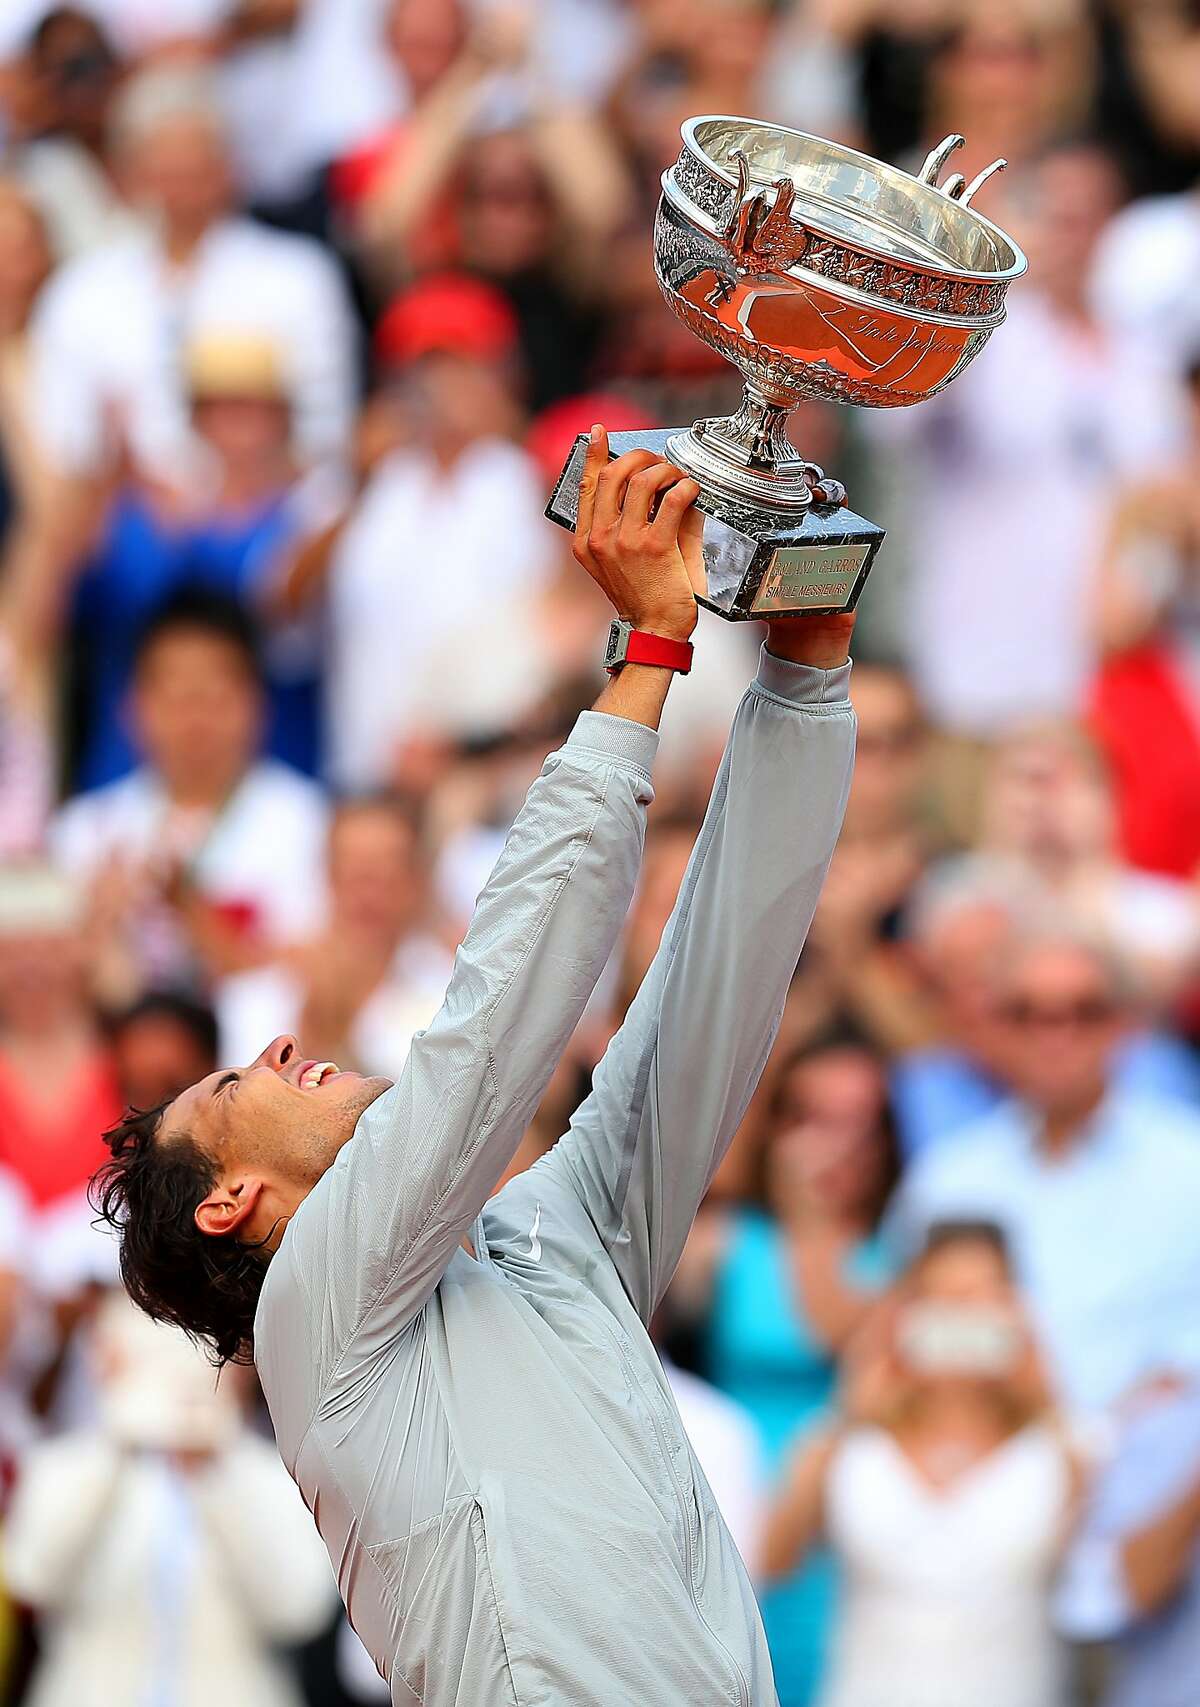 Rafael Nadal wins 9th French Open title